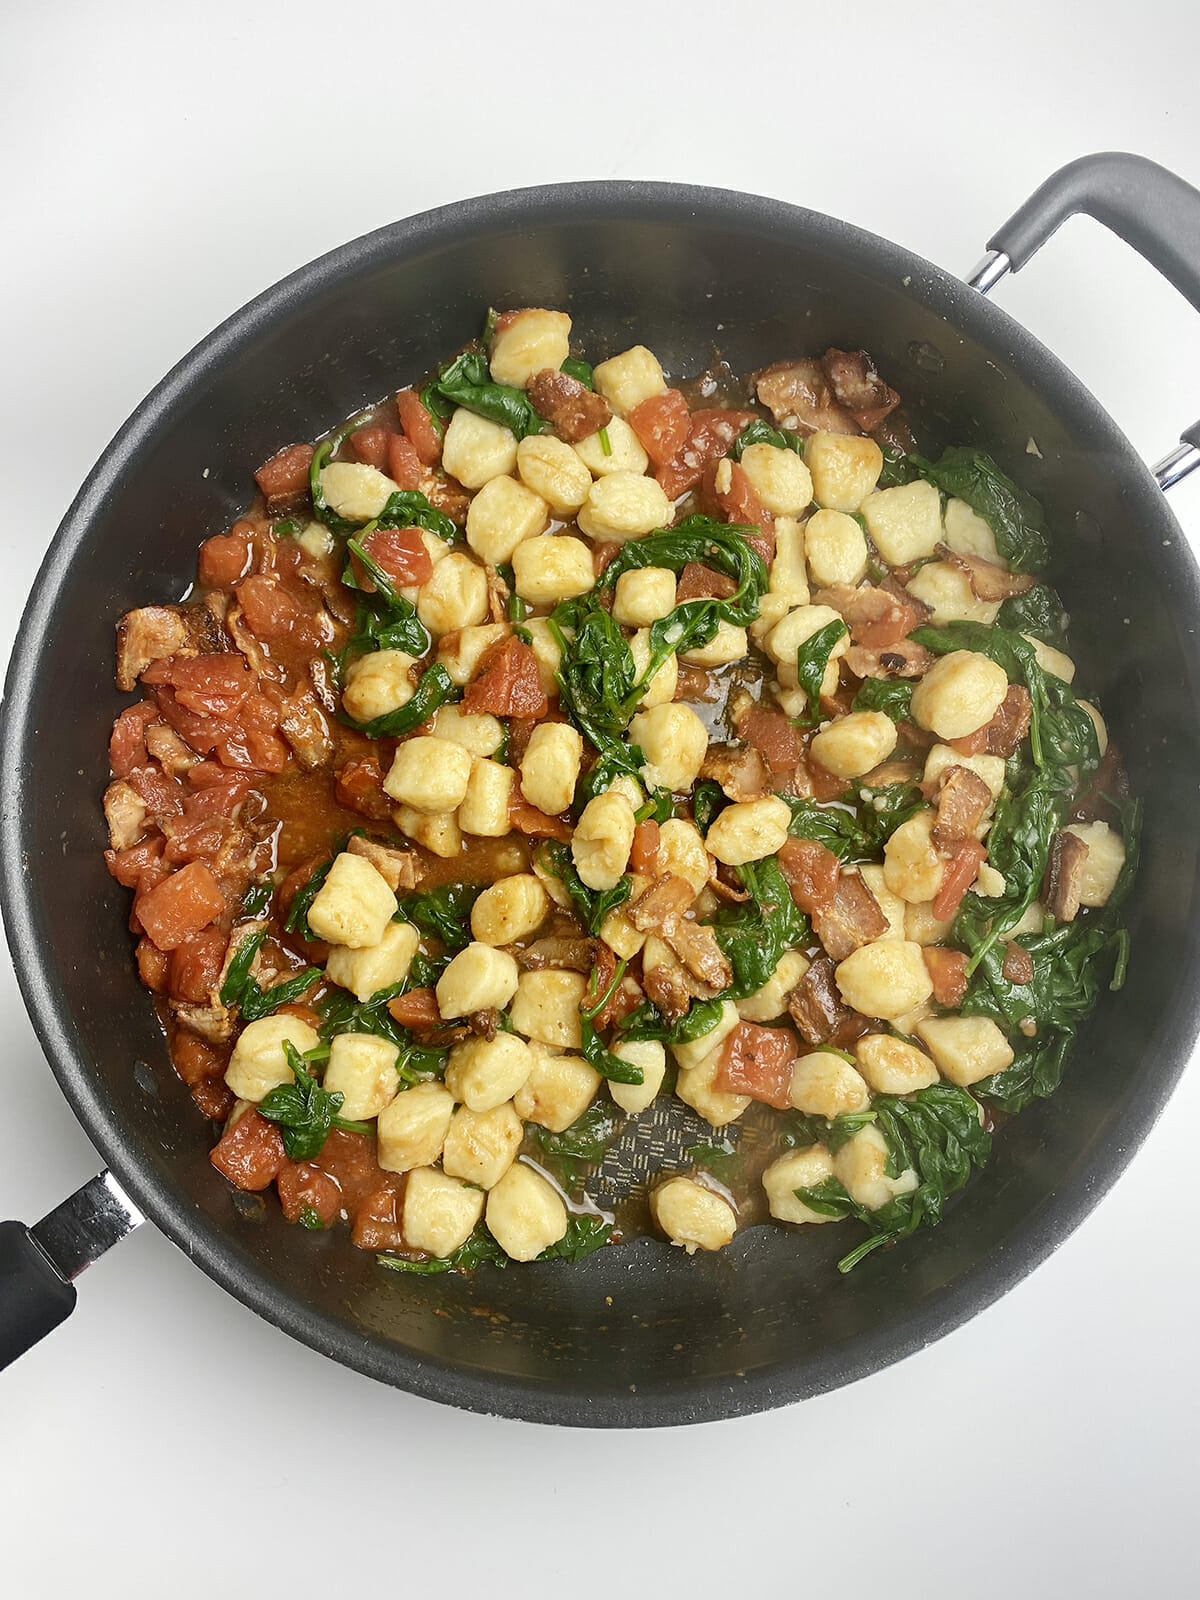 Gnocchi with bacon spinach sauce in a skillet.